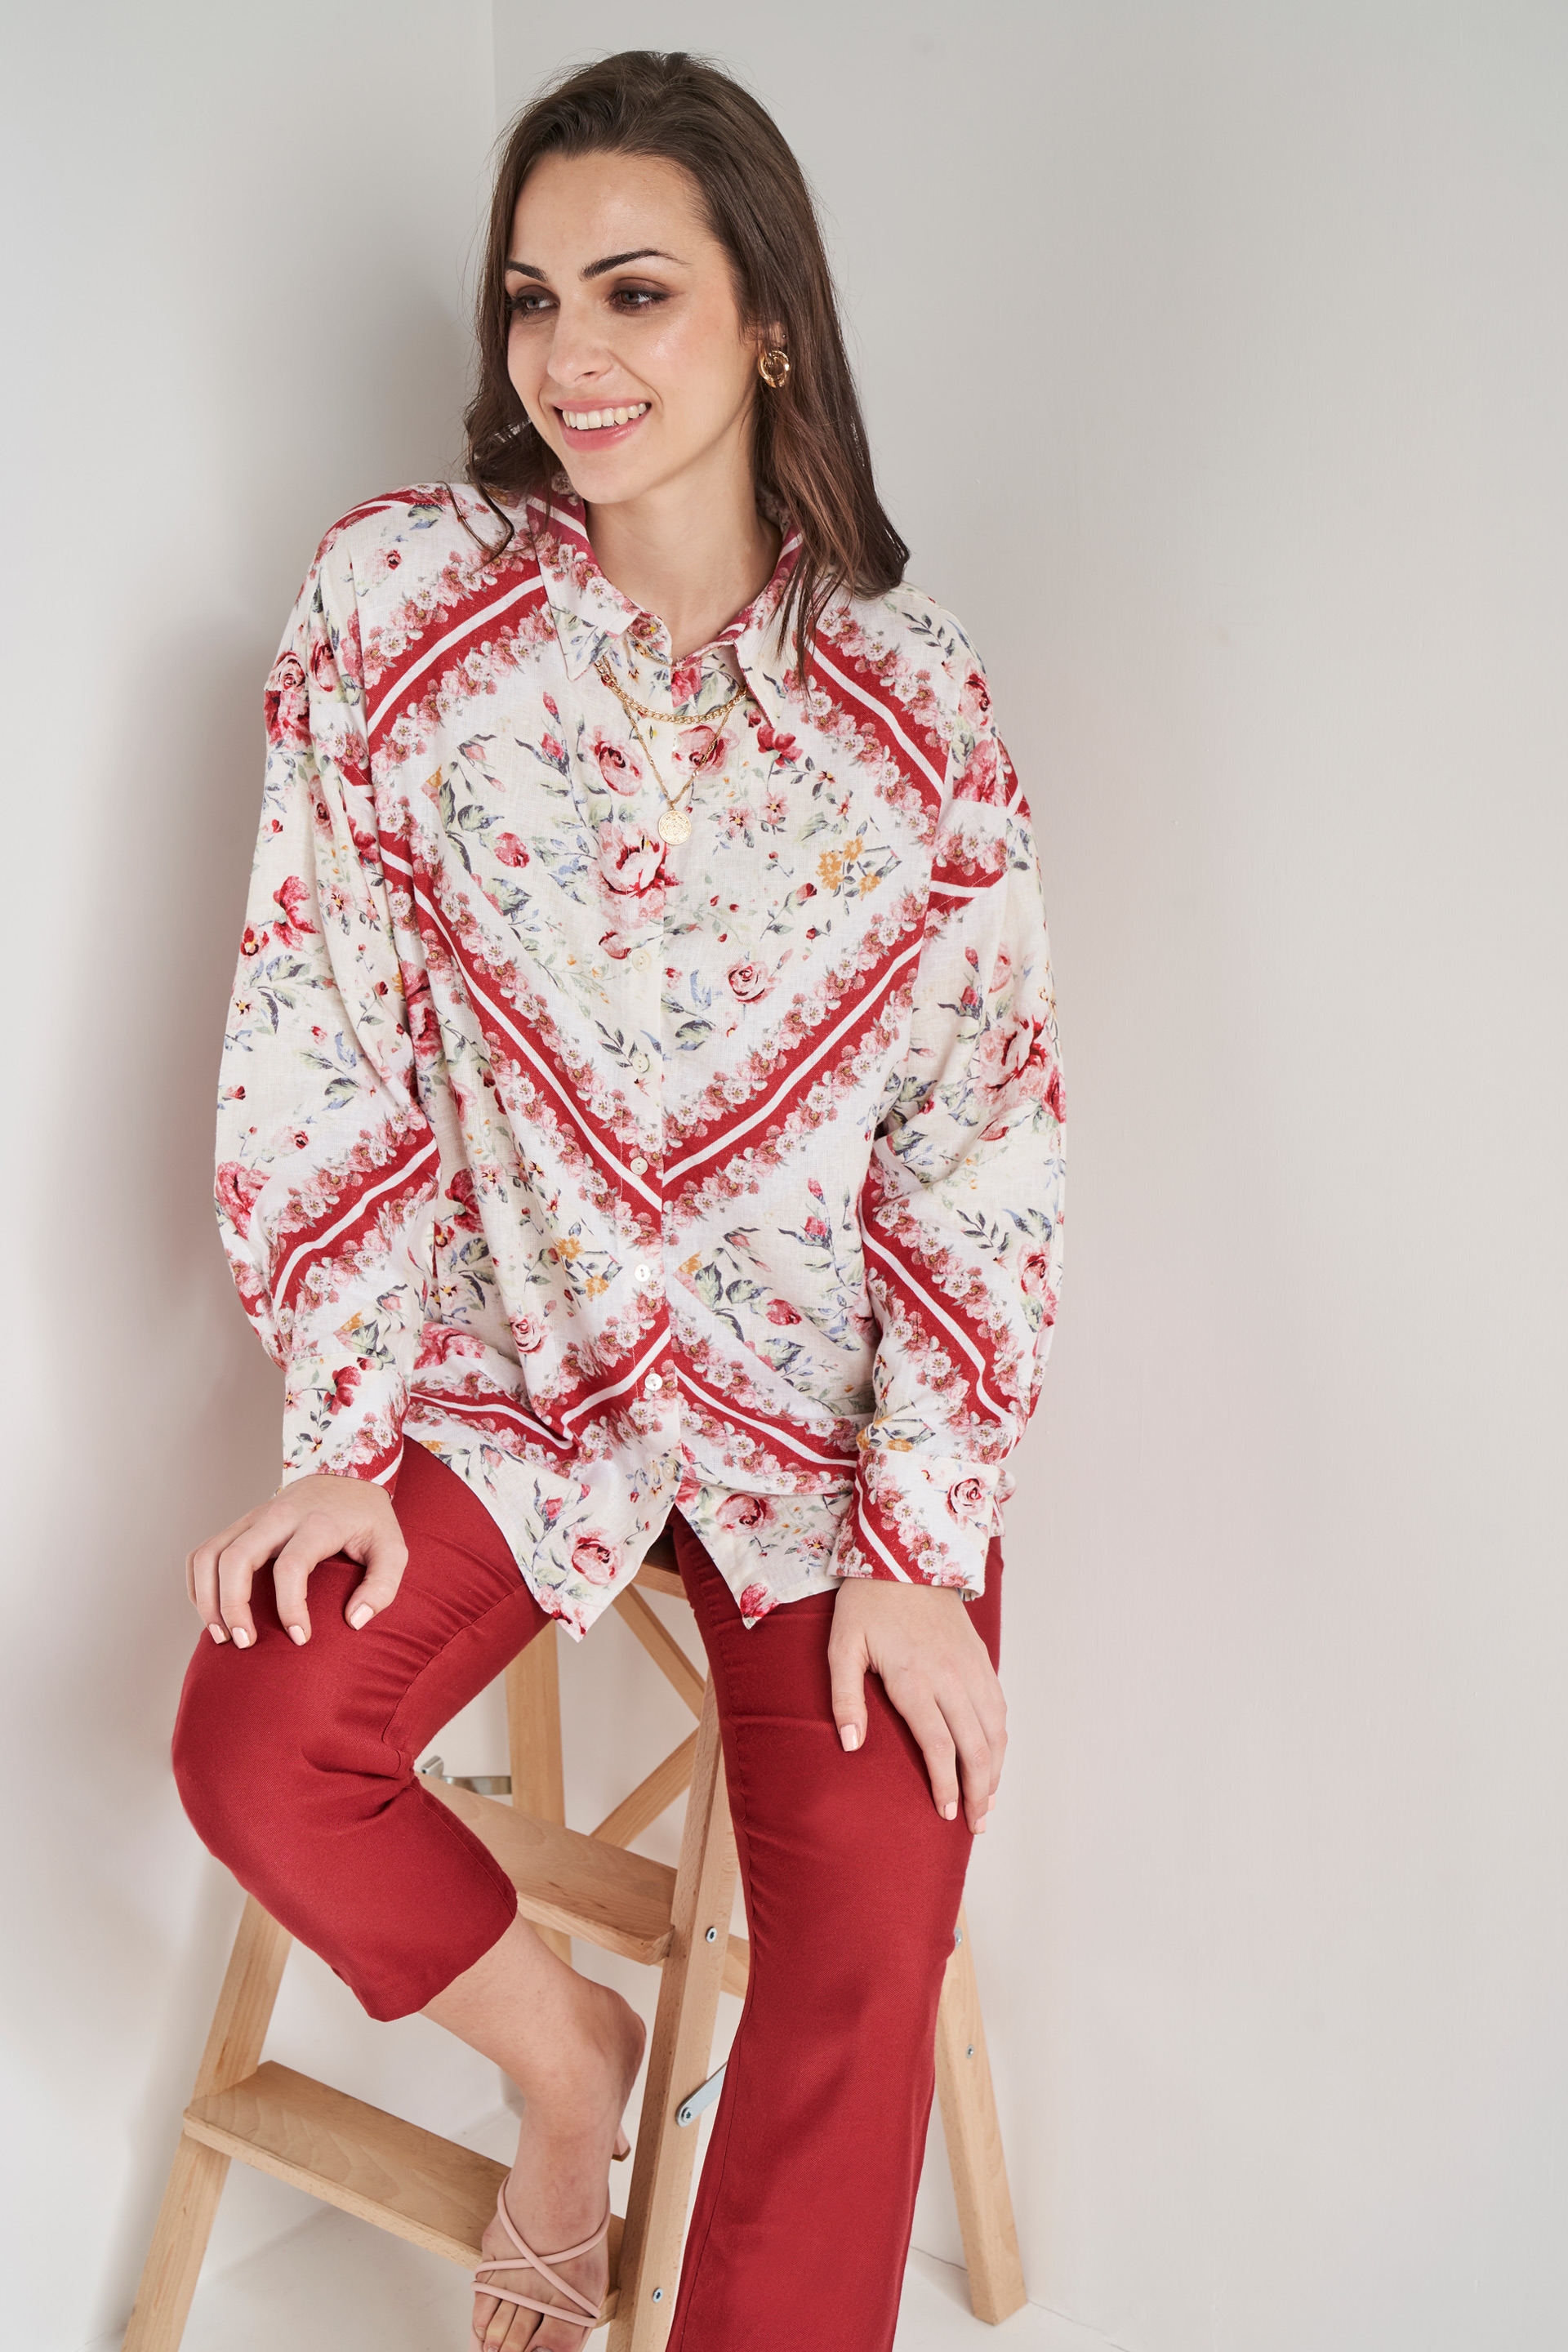 AND Asymmetric Red/Wht Top